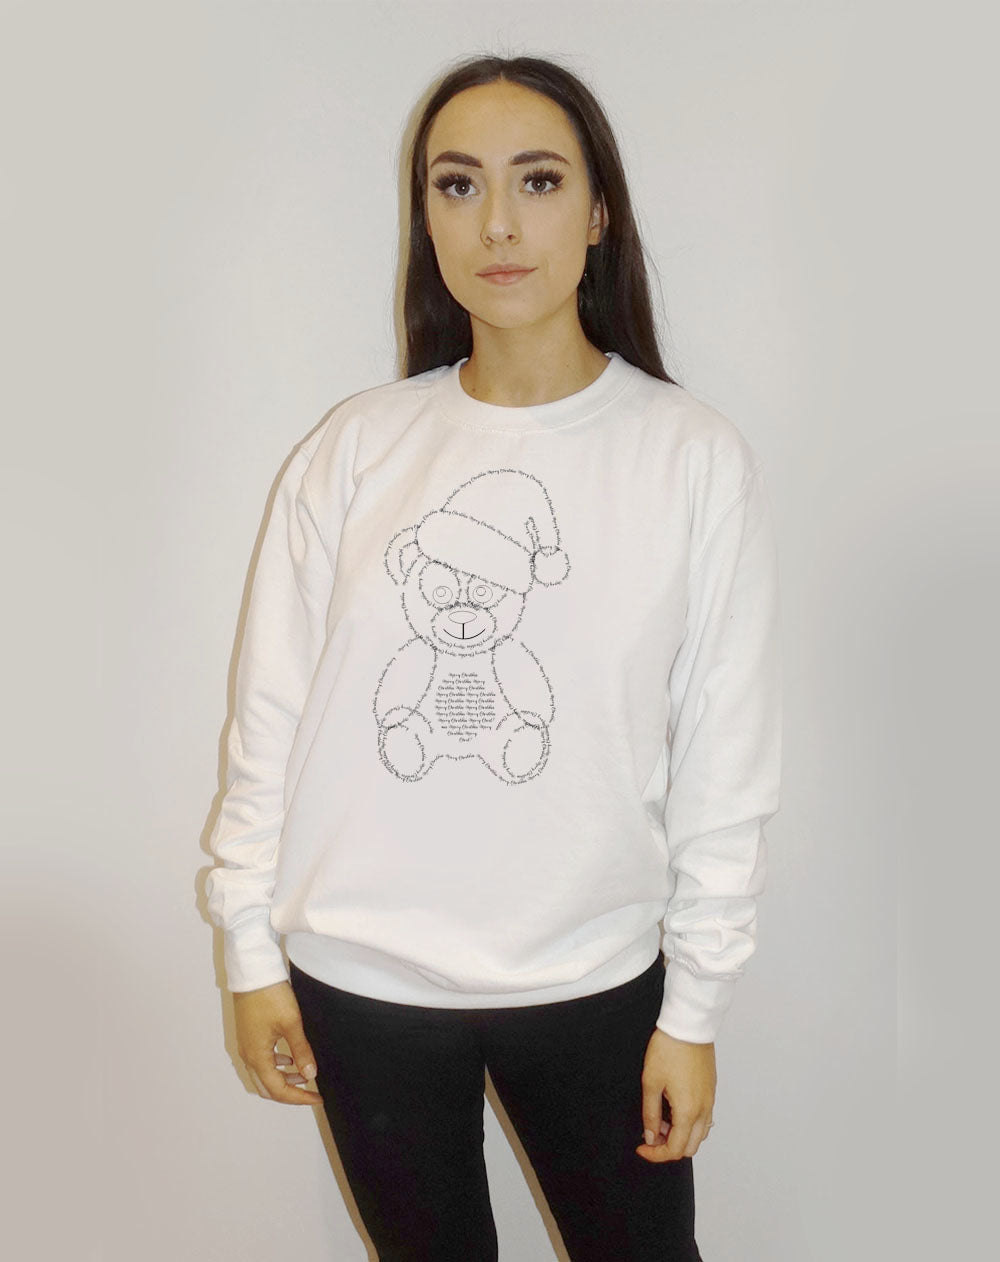 White Christmas Jumper With Black Festive Font Teddy Claus Print